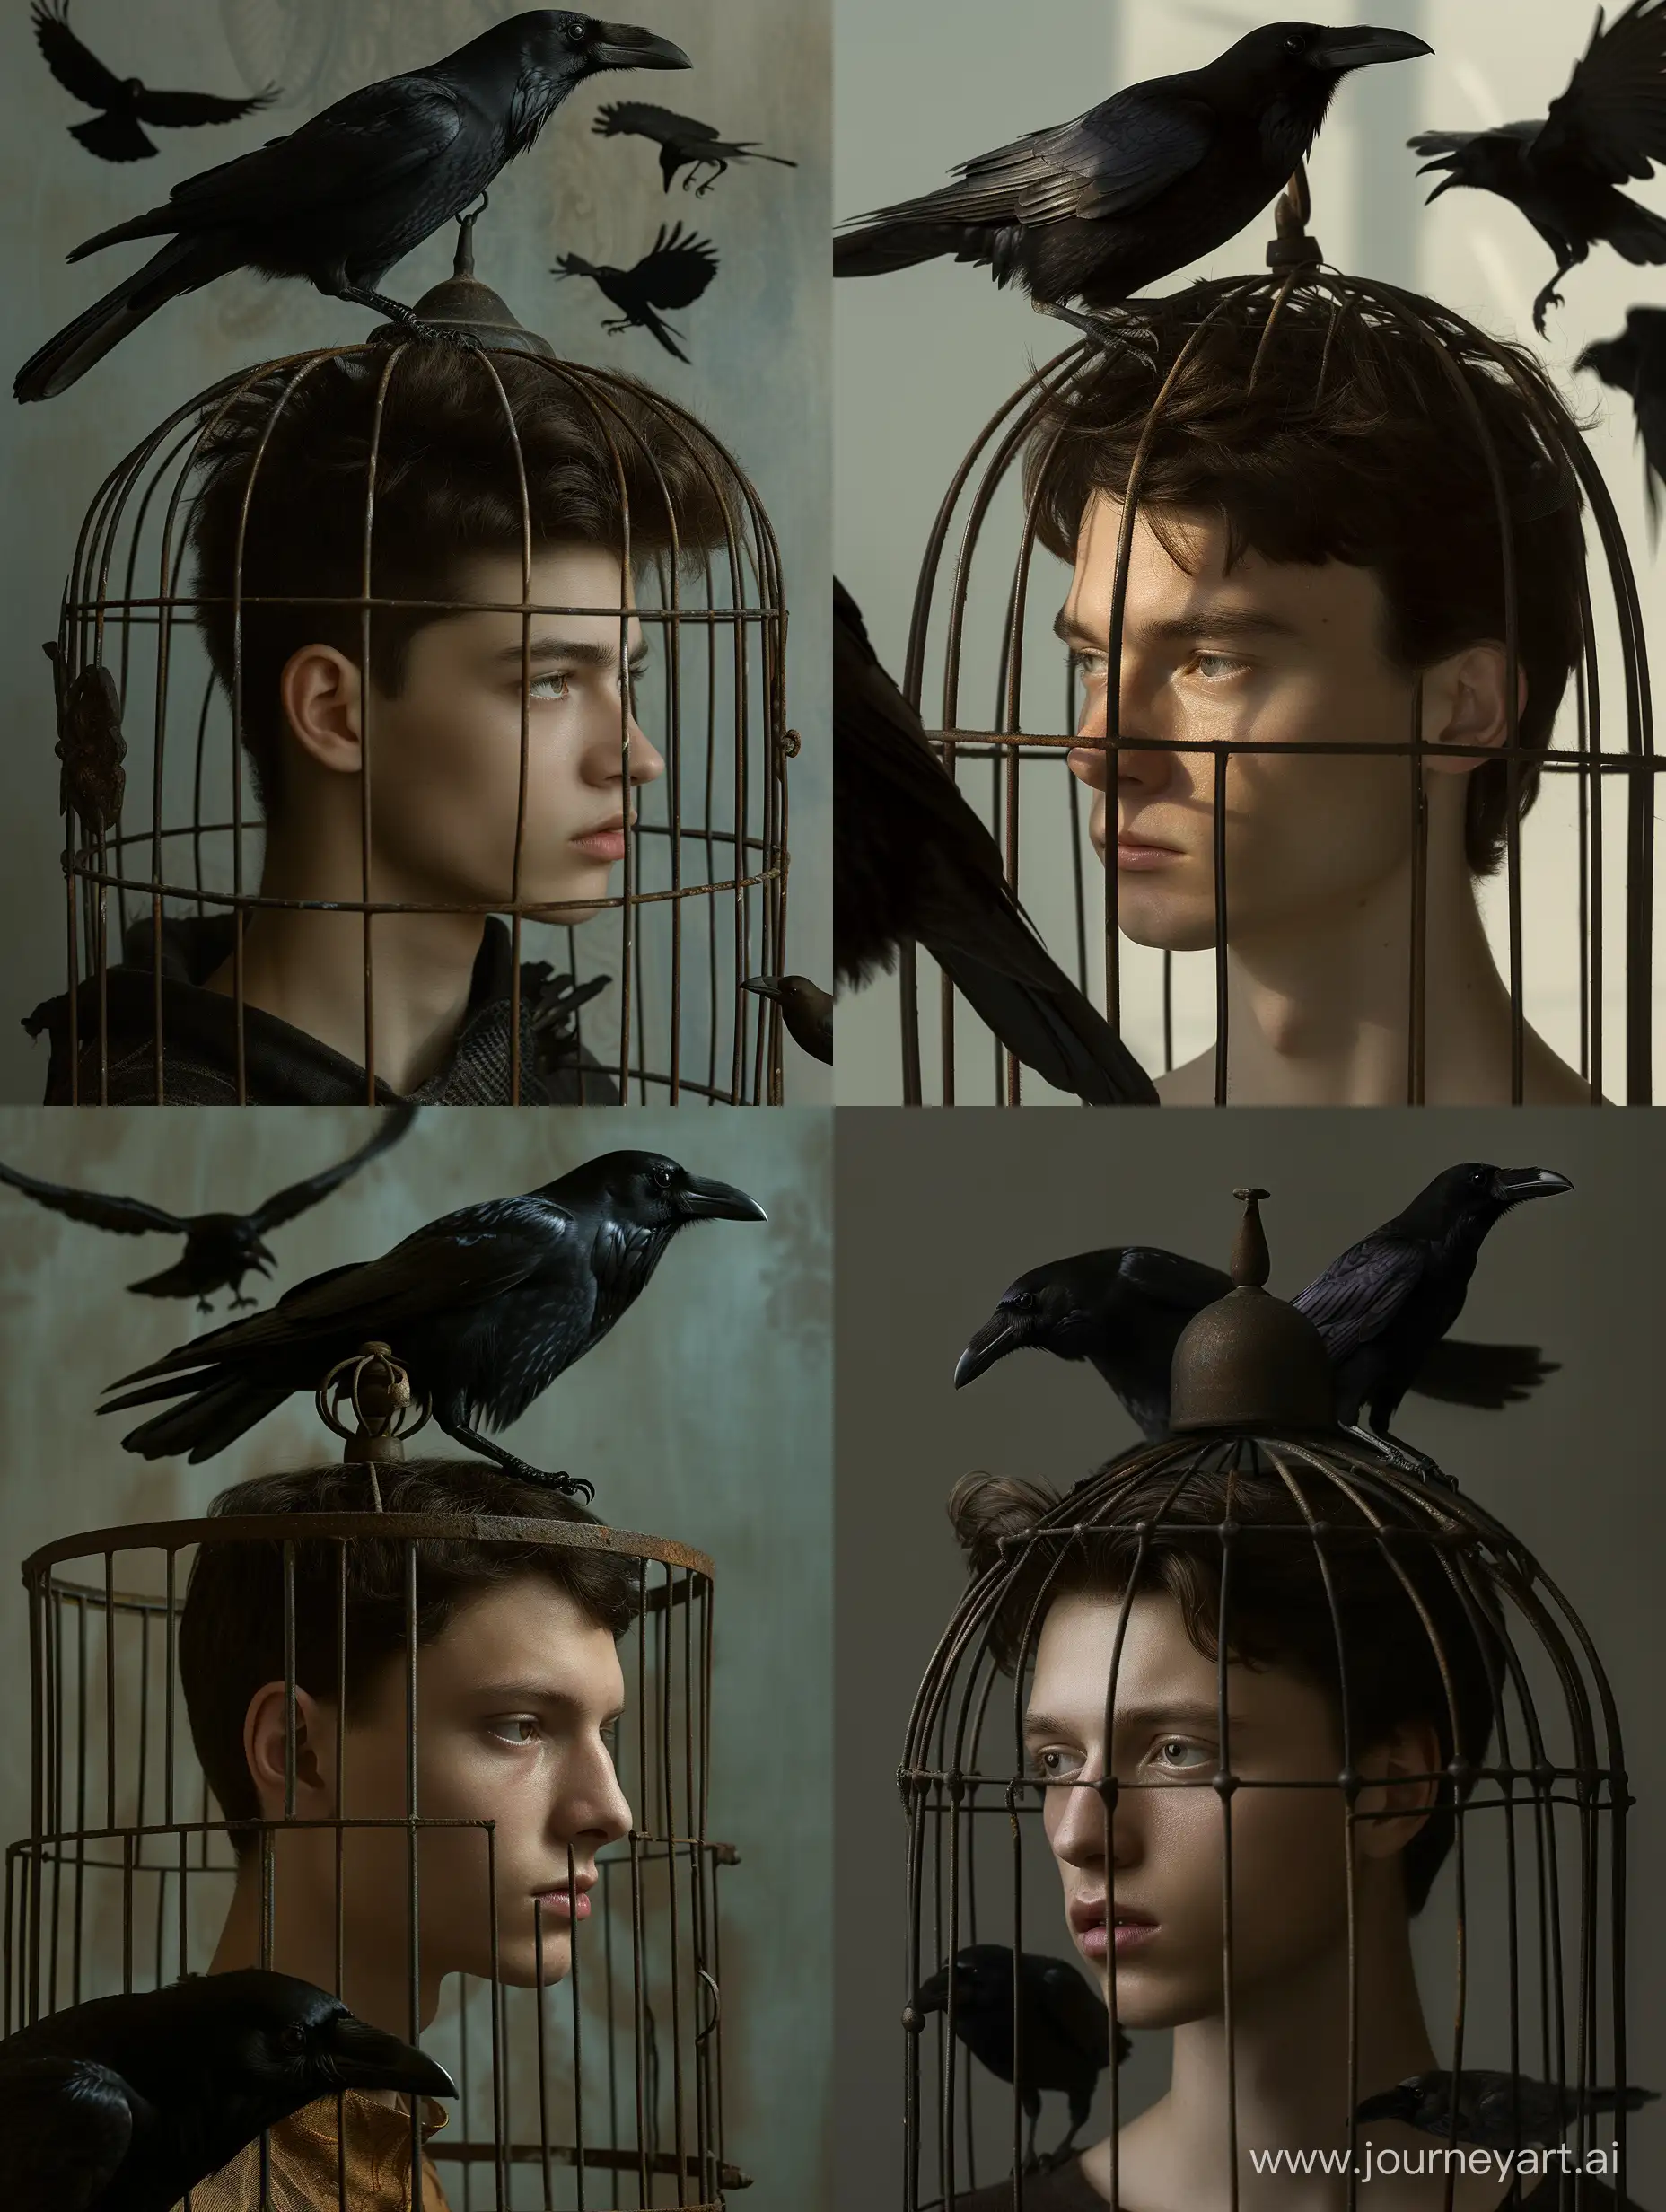 hyperrealistic photo of a thin 20-year-old Slavic man, dark brown short hair, his head and face are enclosed in a metal bird cage, a black raven sits on the dome of the cage and three black crows circle around, in the style of Annie Leibovitz, dramatic light